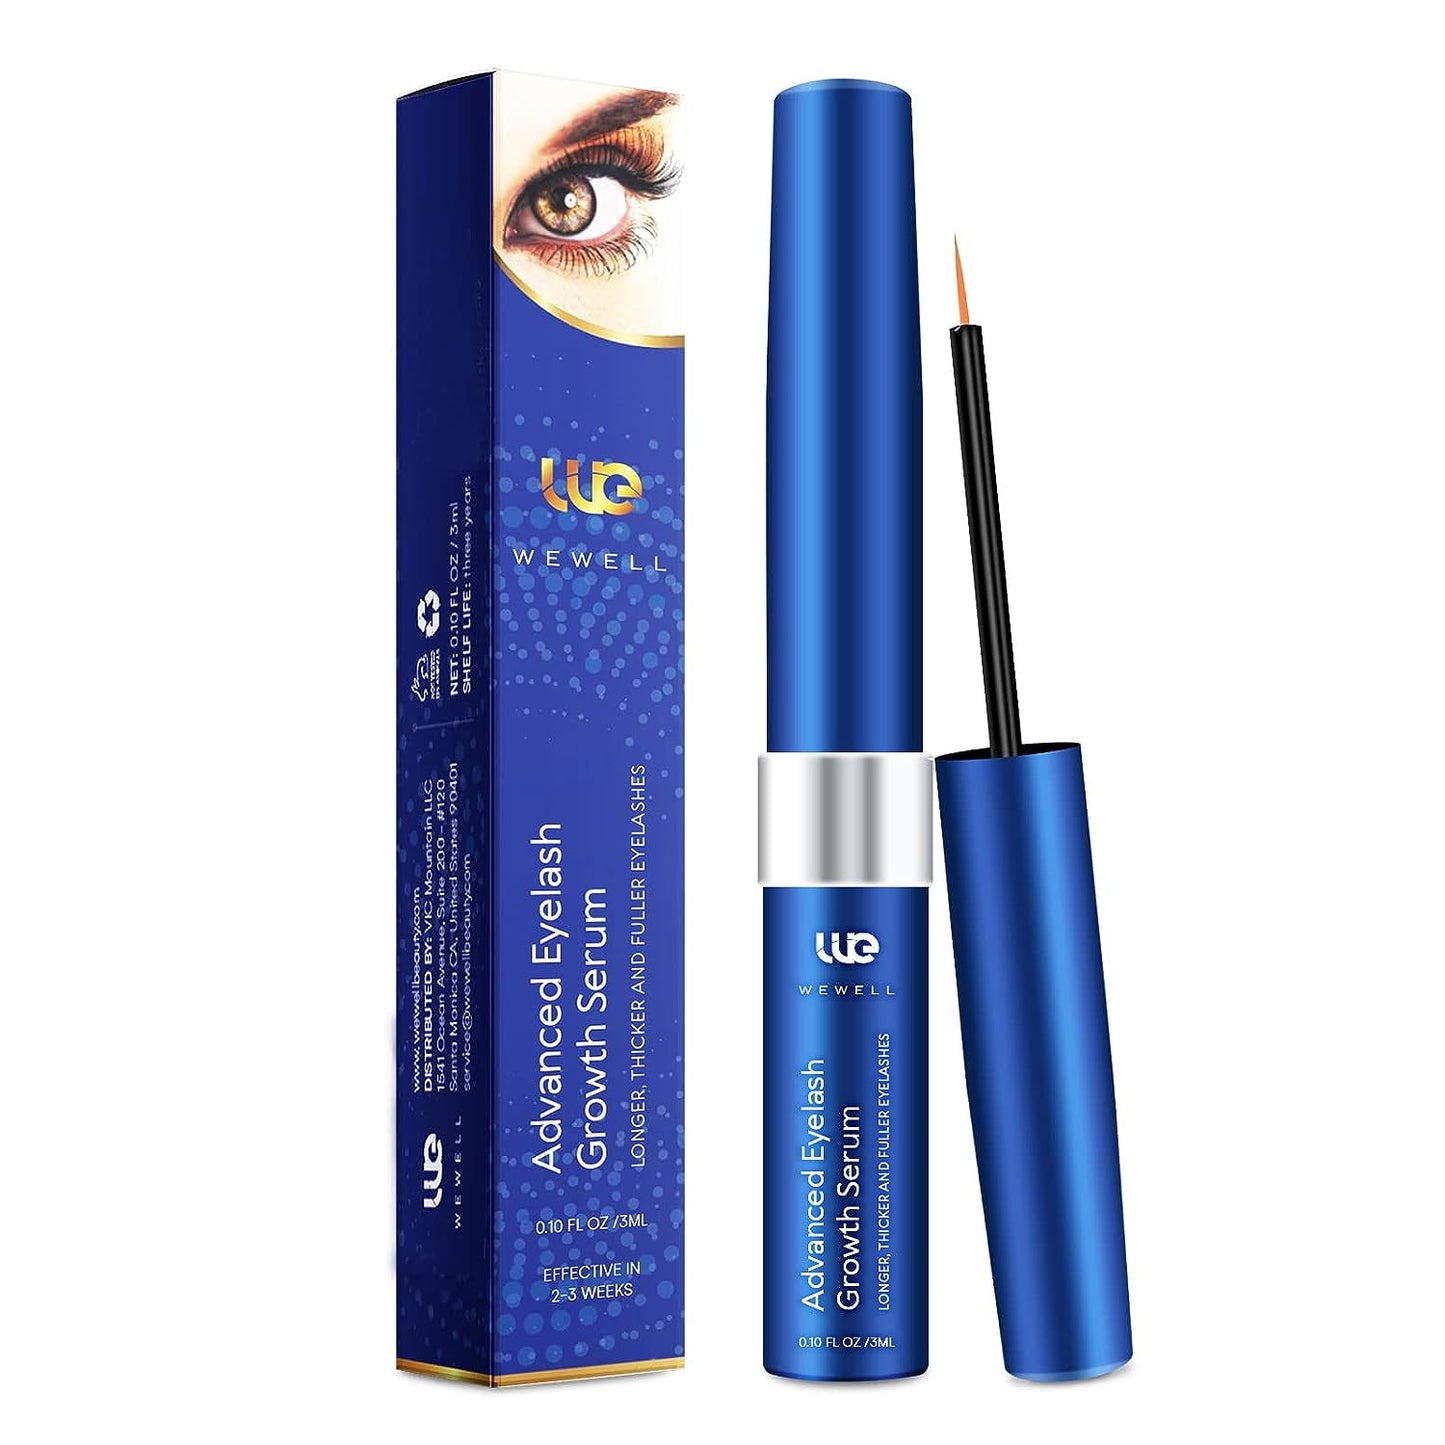 Lash Serum, Eyelash Growth Serum, Eyelash Serum, Lash Serum for Eyelash Growth, Boost Lash Growth Serum, Advanced Formula for Longer, Fuller, and Thicker Lashes, 3 ML